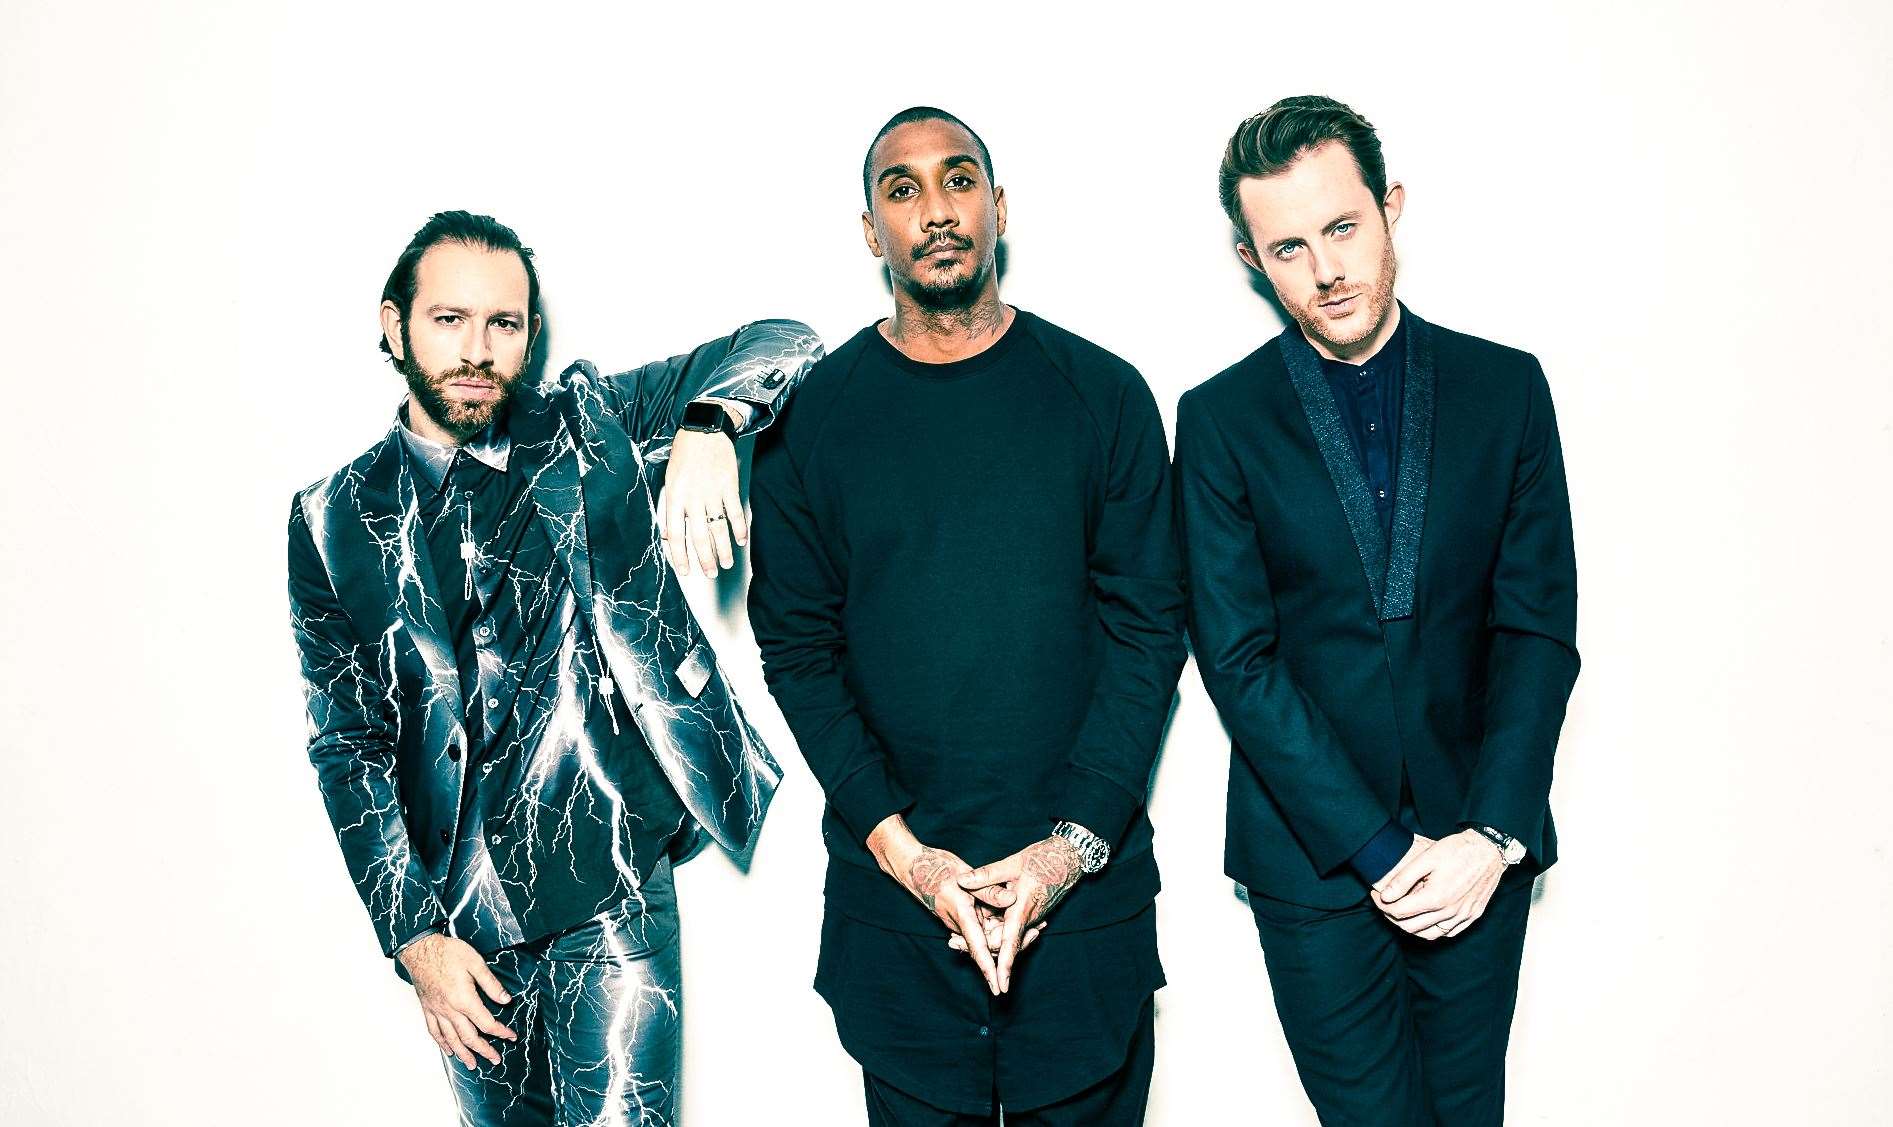 Chase and Status will return to Dreamland